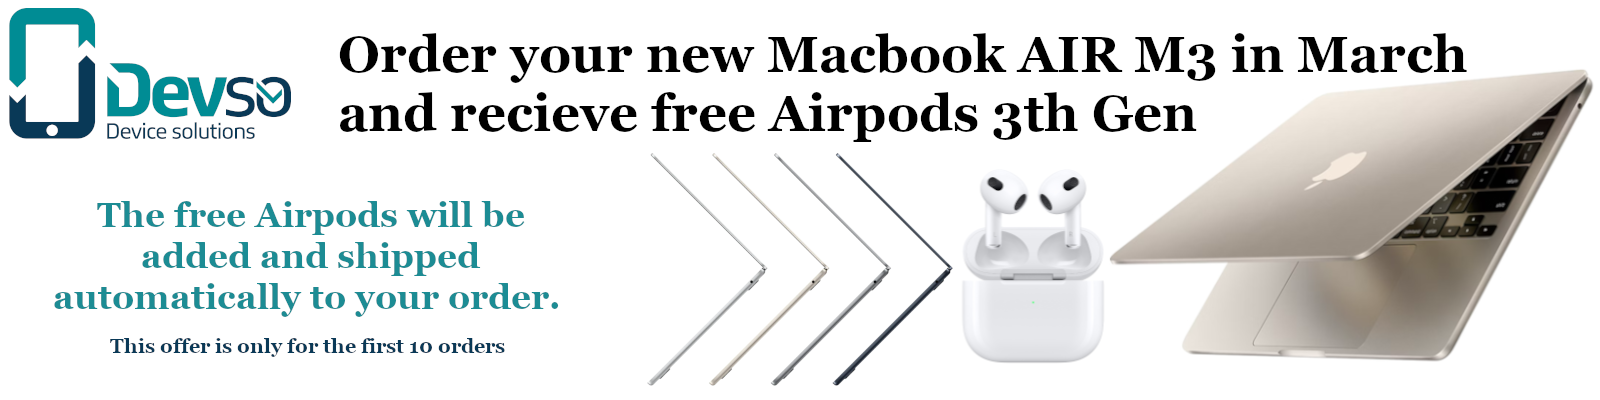 Free Airpods MBA M3